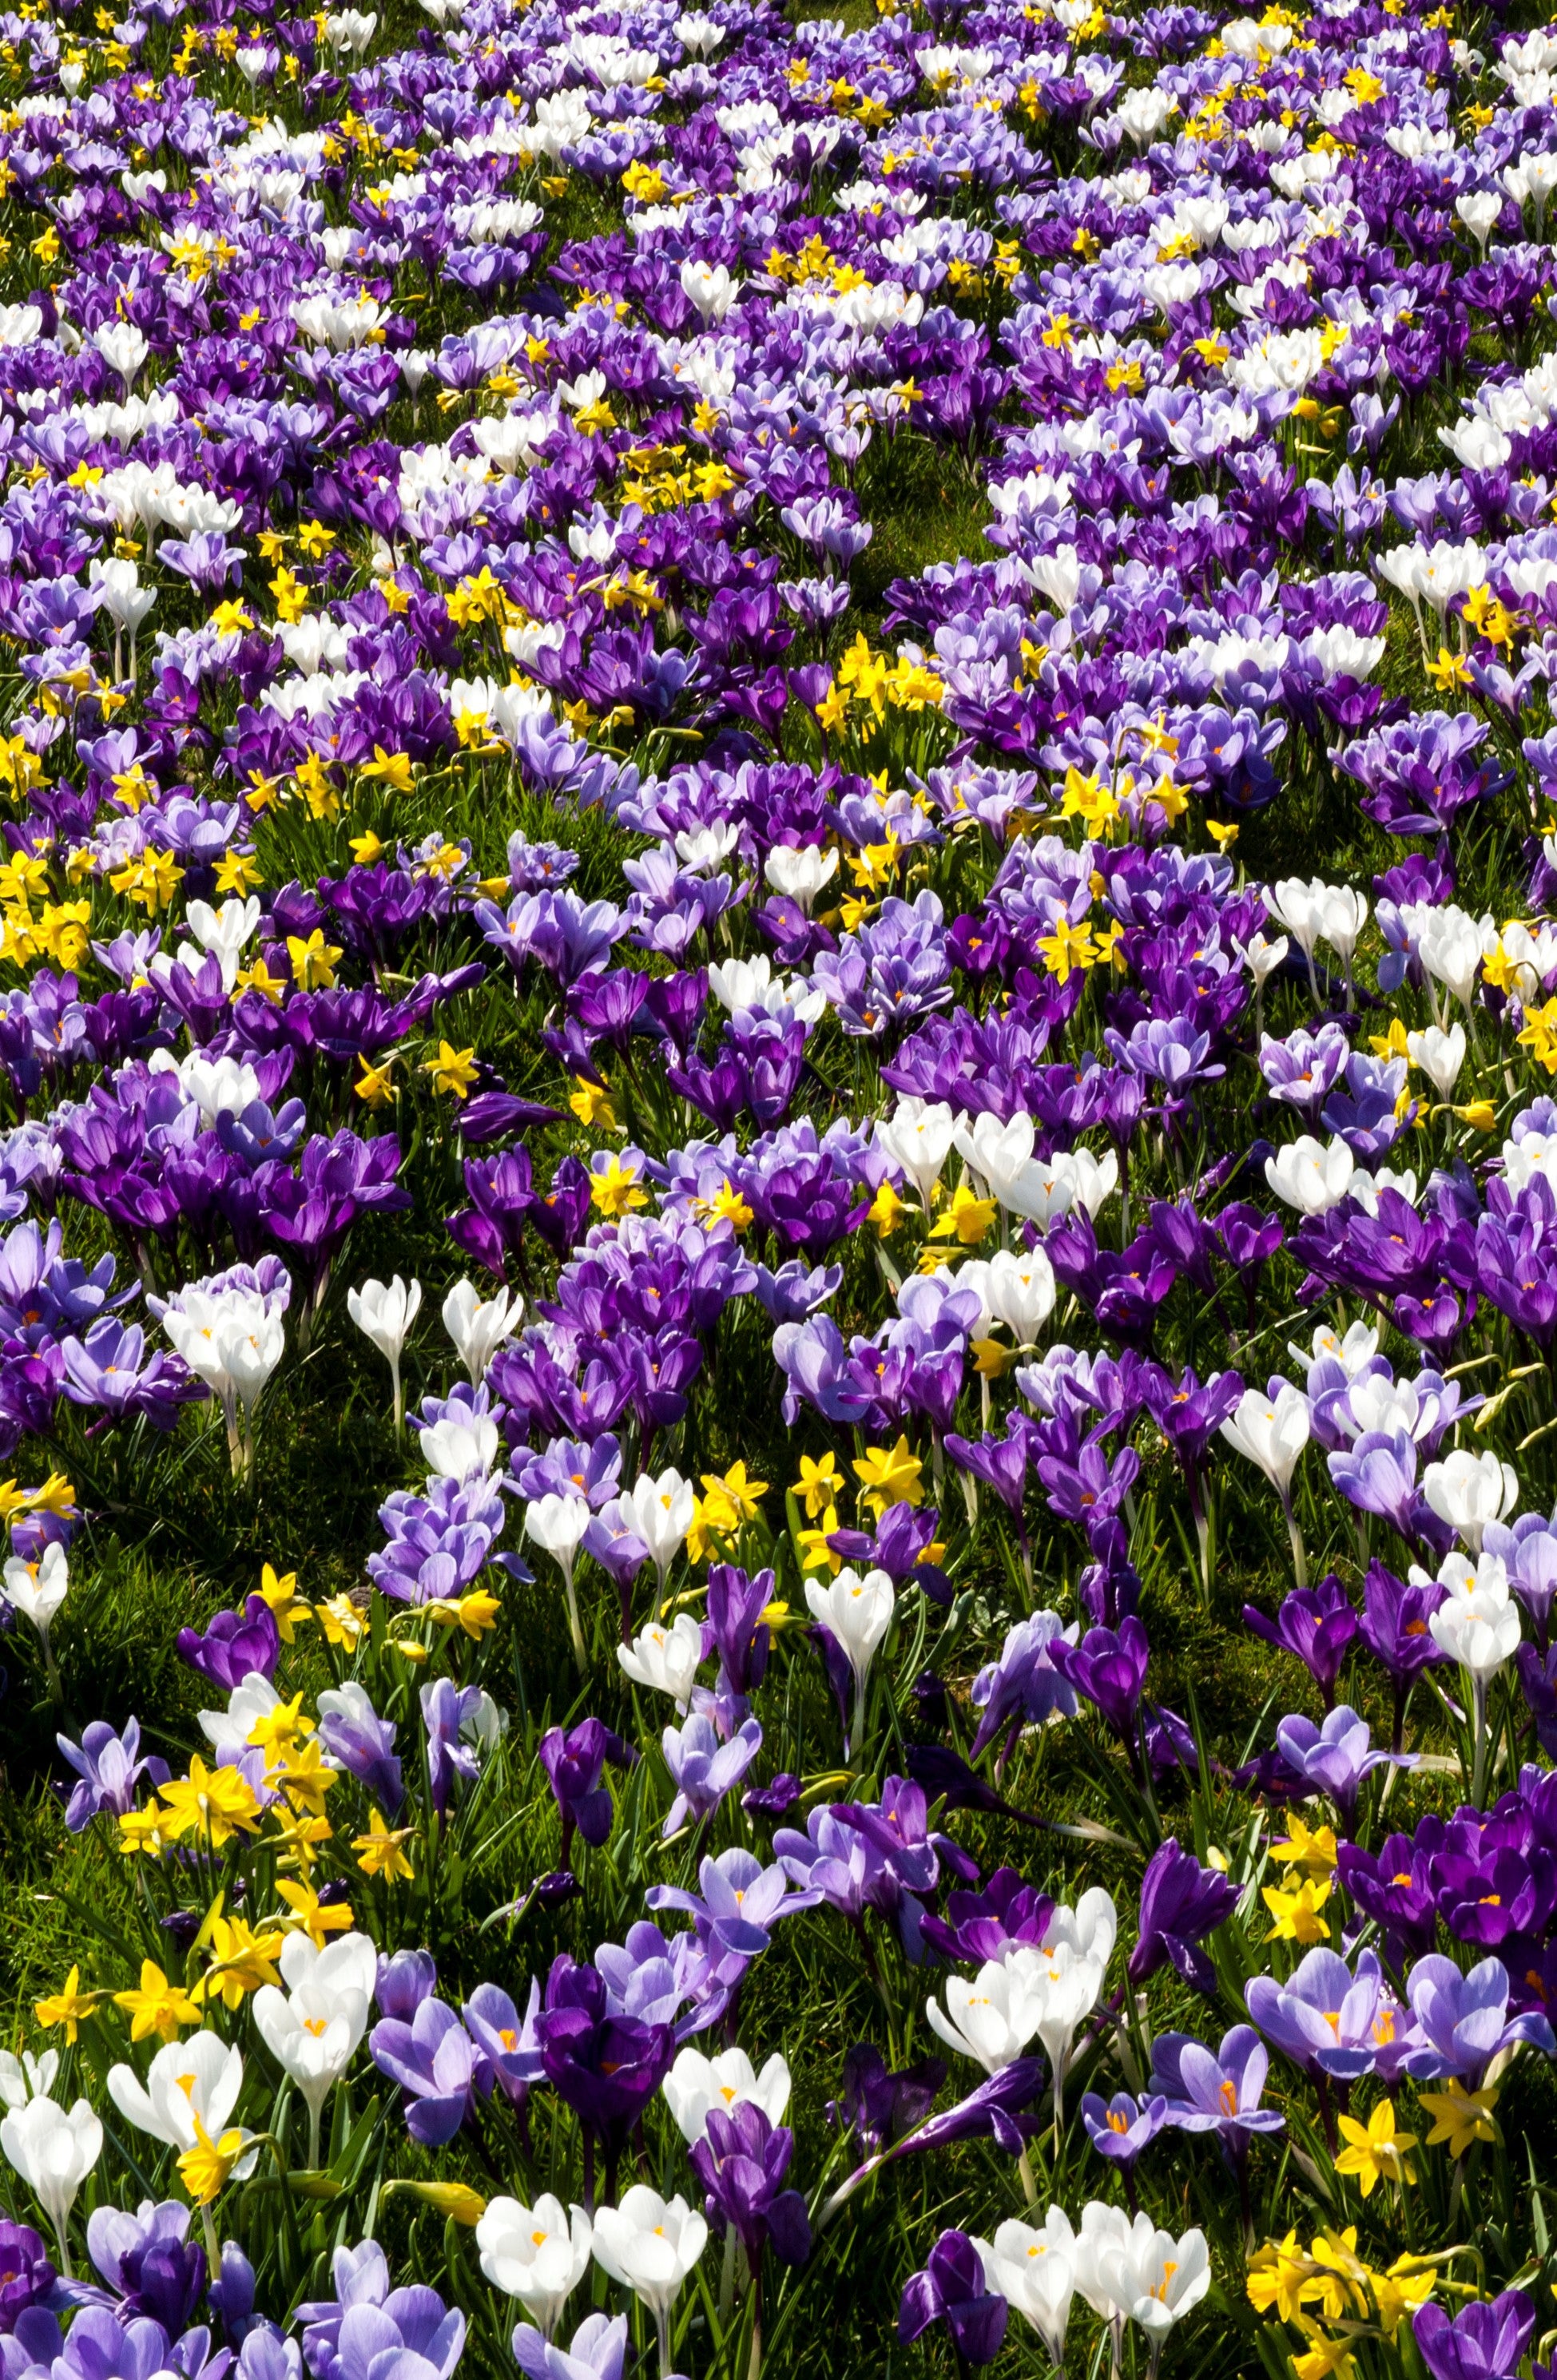 Vivid Crocus mixed blooms: nature's palette painted on the ground.